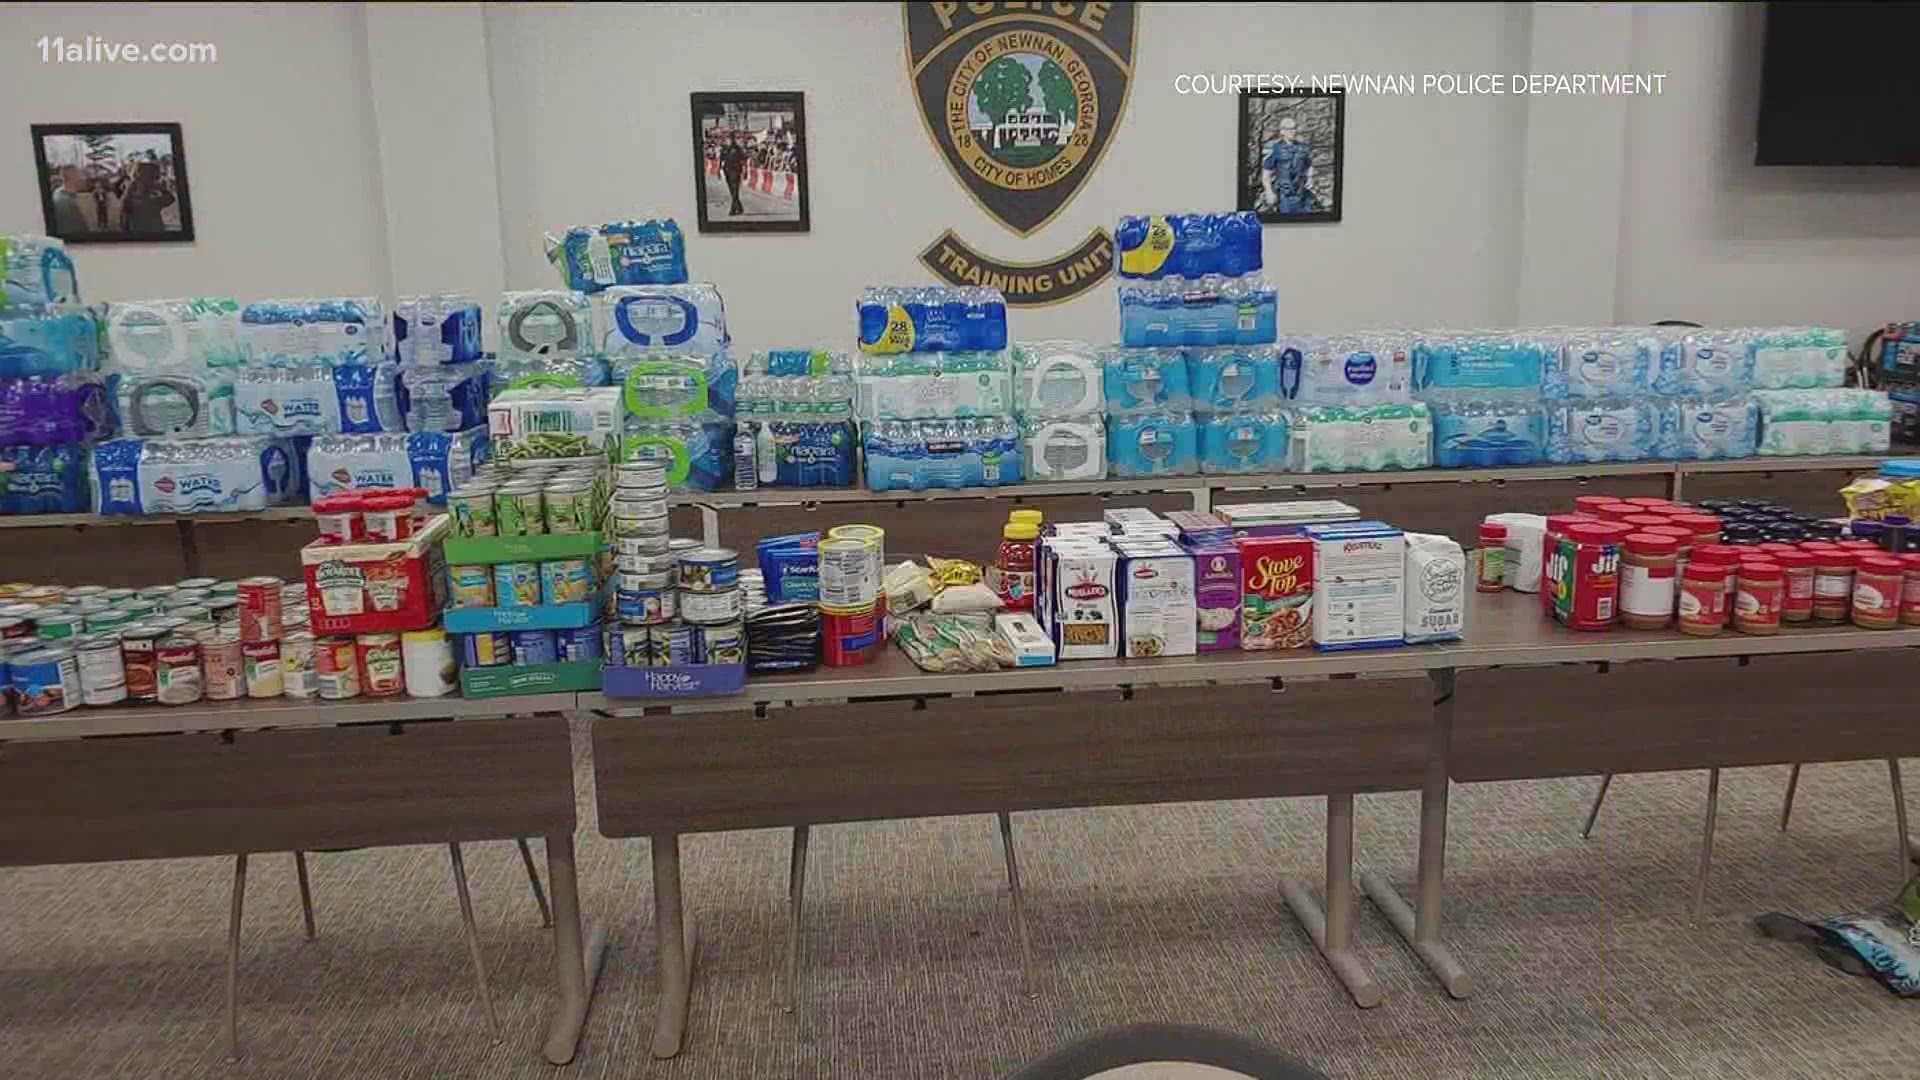 Police say they're no longer taking donations because of the generosity so far.